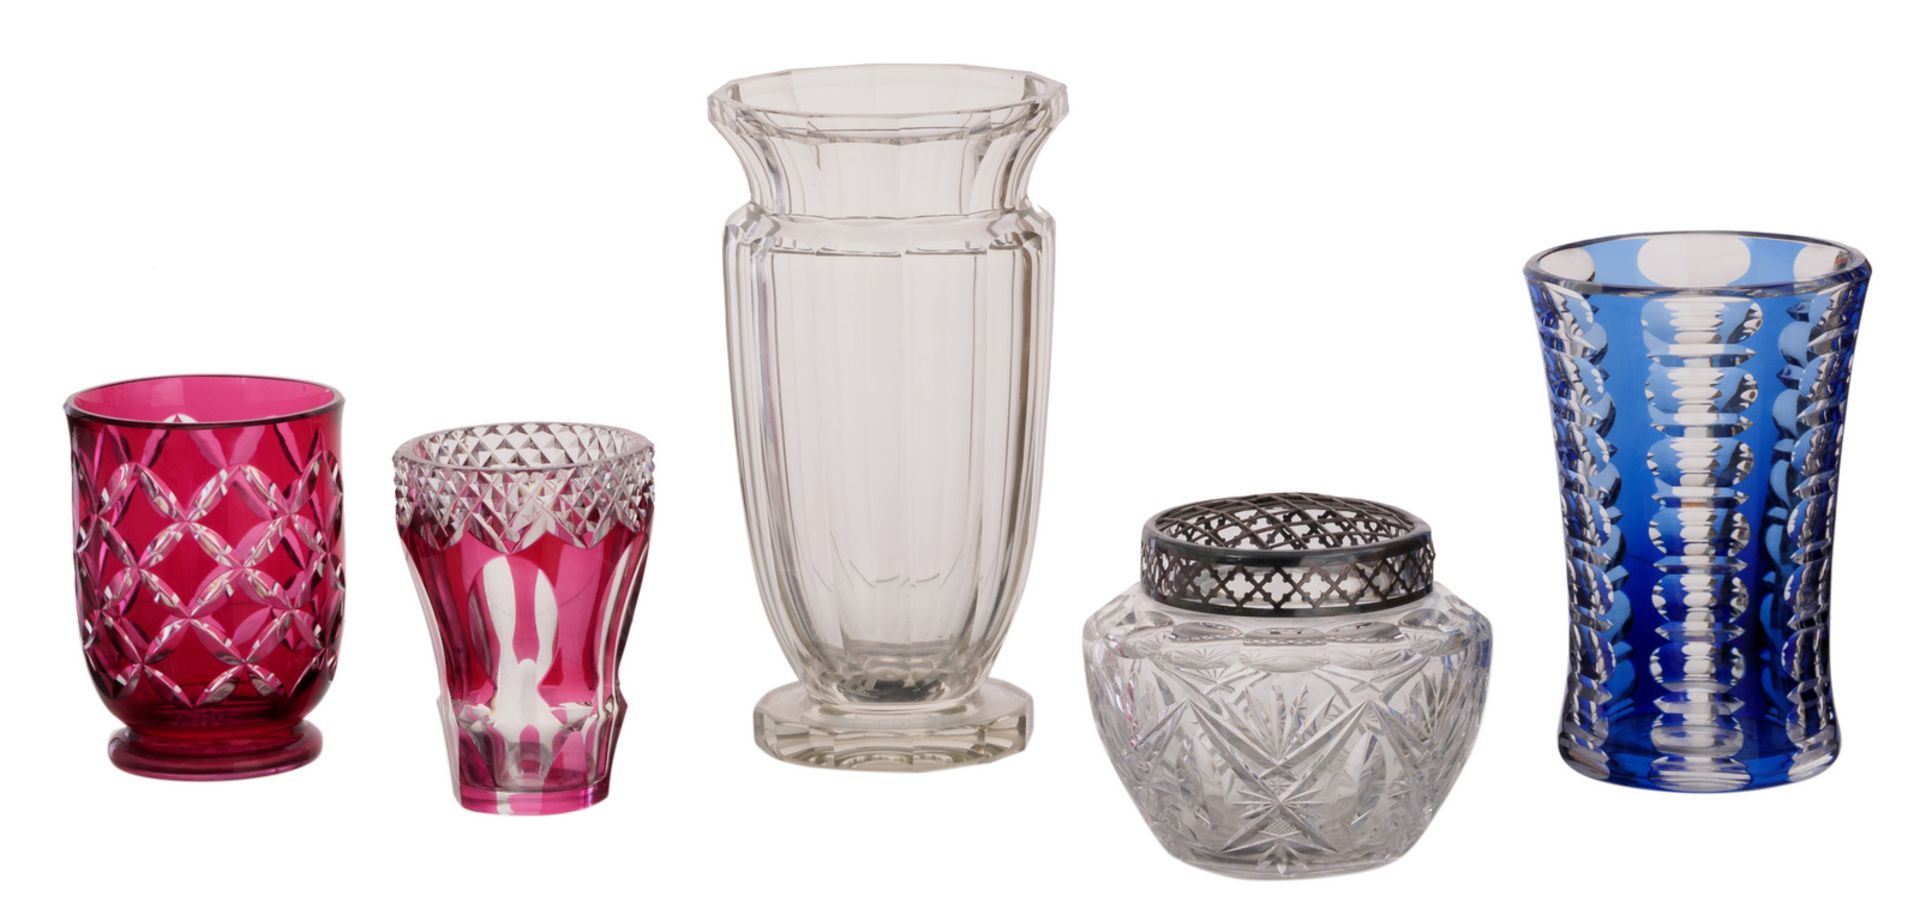 Four vases and one pique fleur, some of which overlay Val-Saint-Lambert crystal cut, H 11,5 - 31 cm